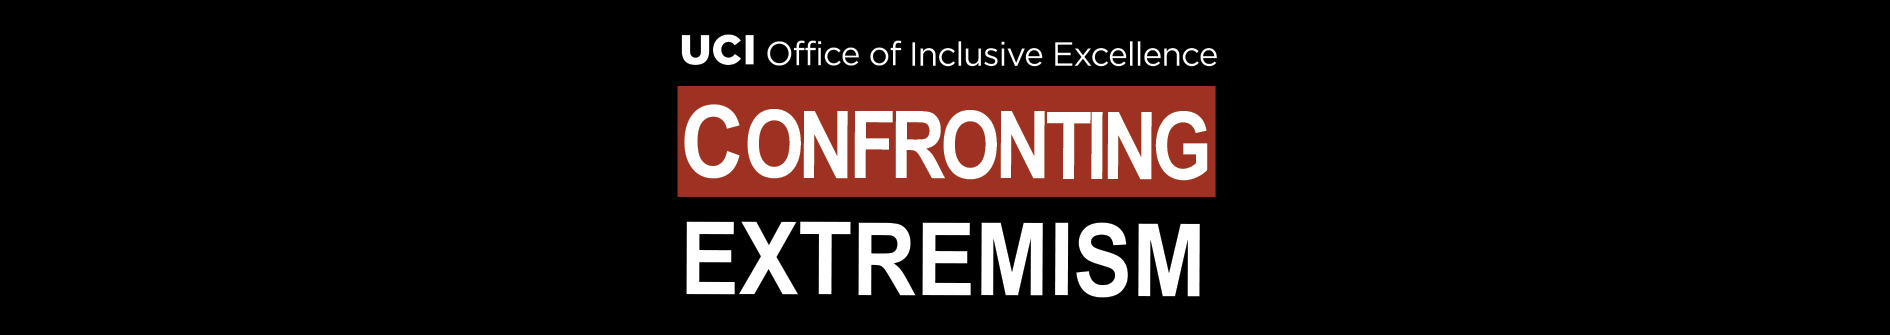 confronting extremism logo